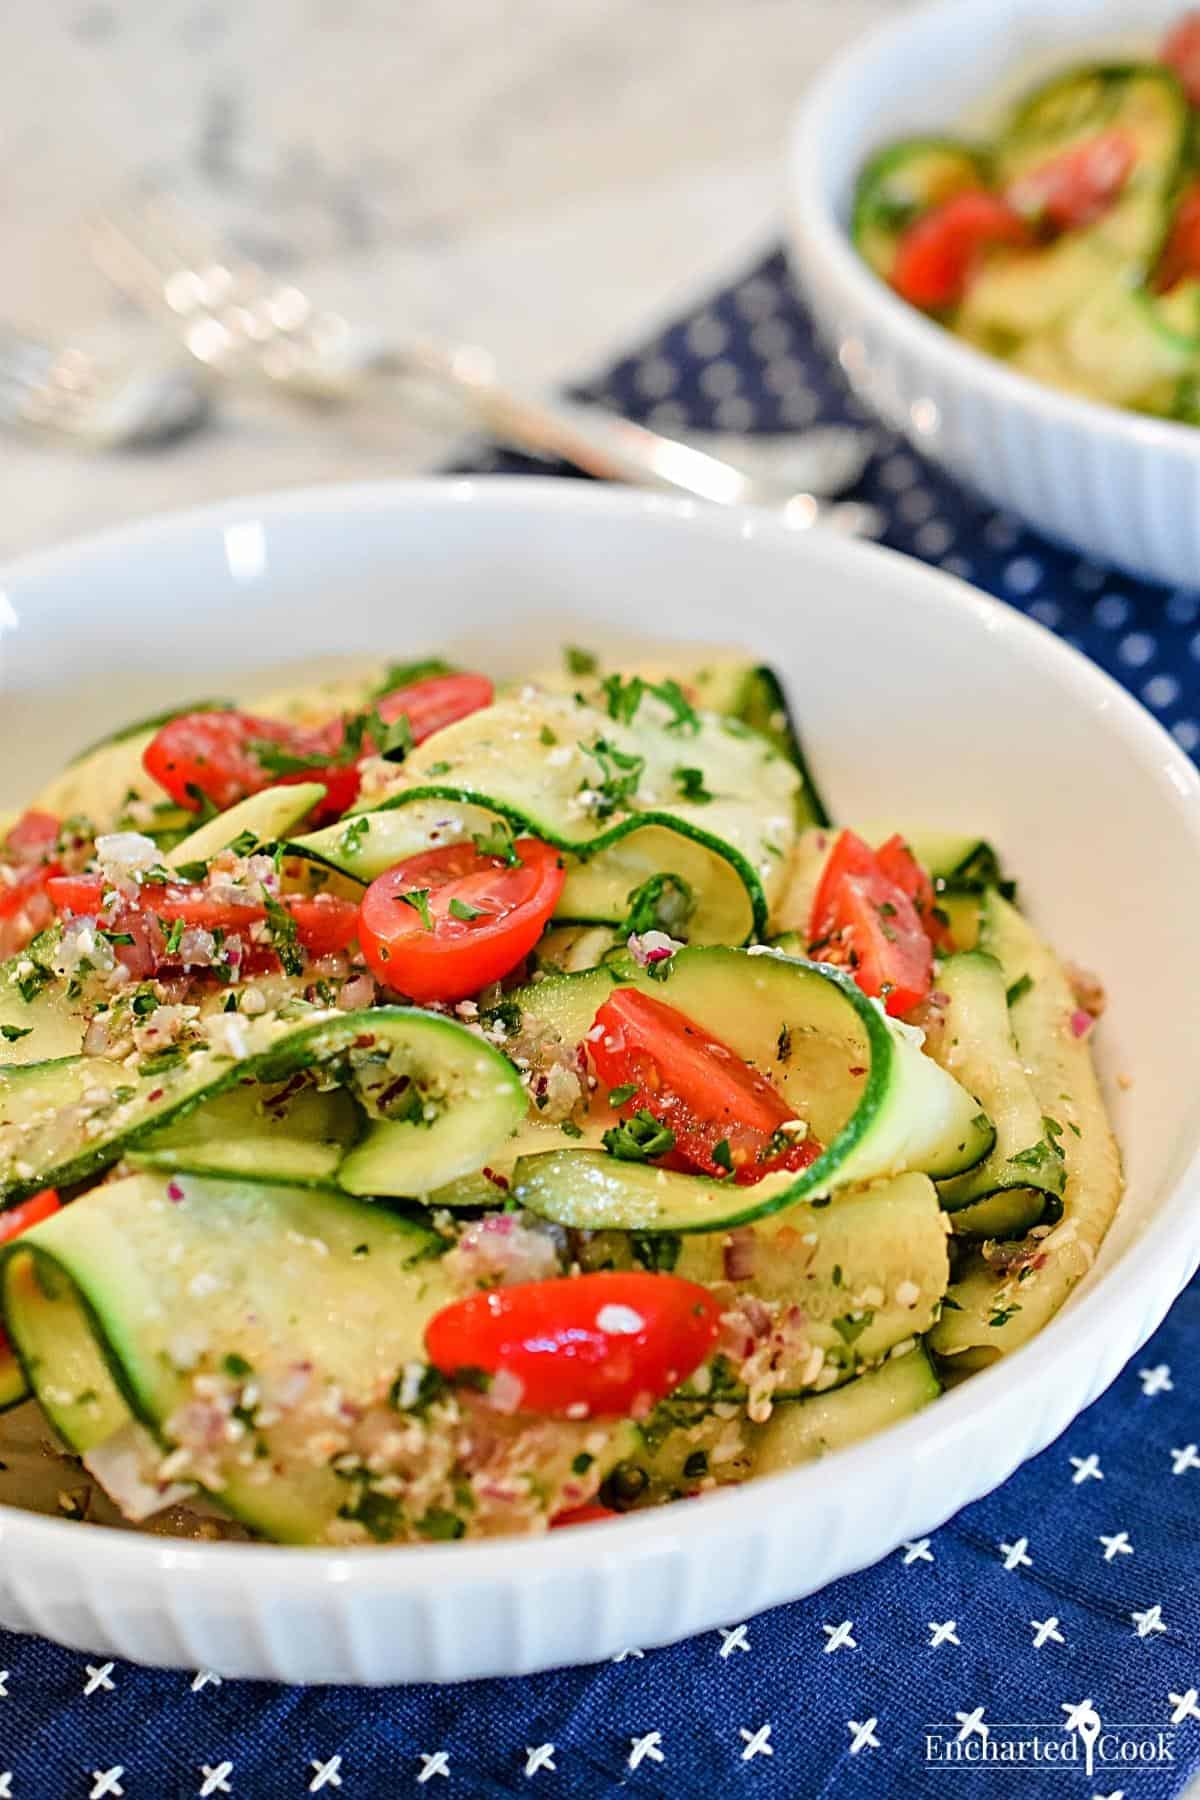 A white bowl filled with ribbons of zucchini and cherry tomatoes.